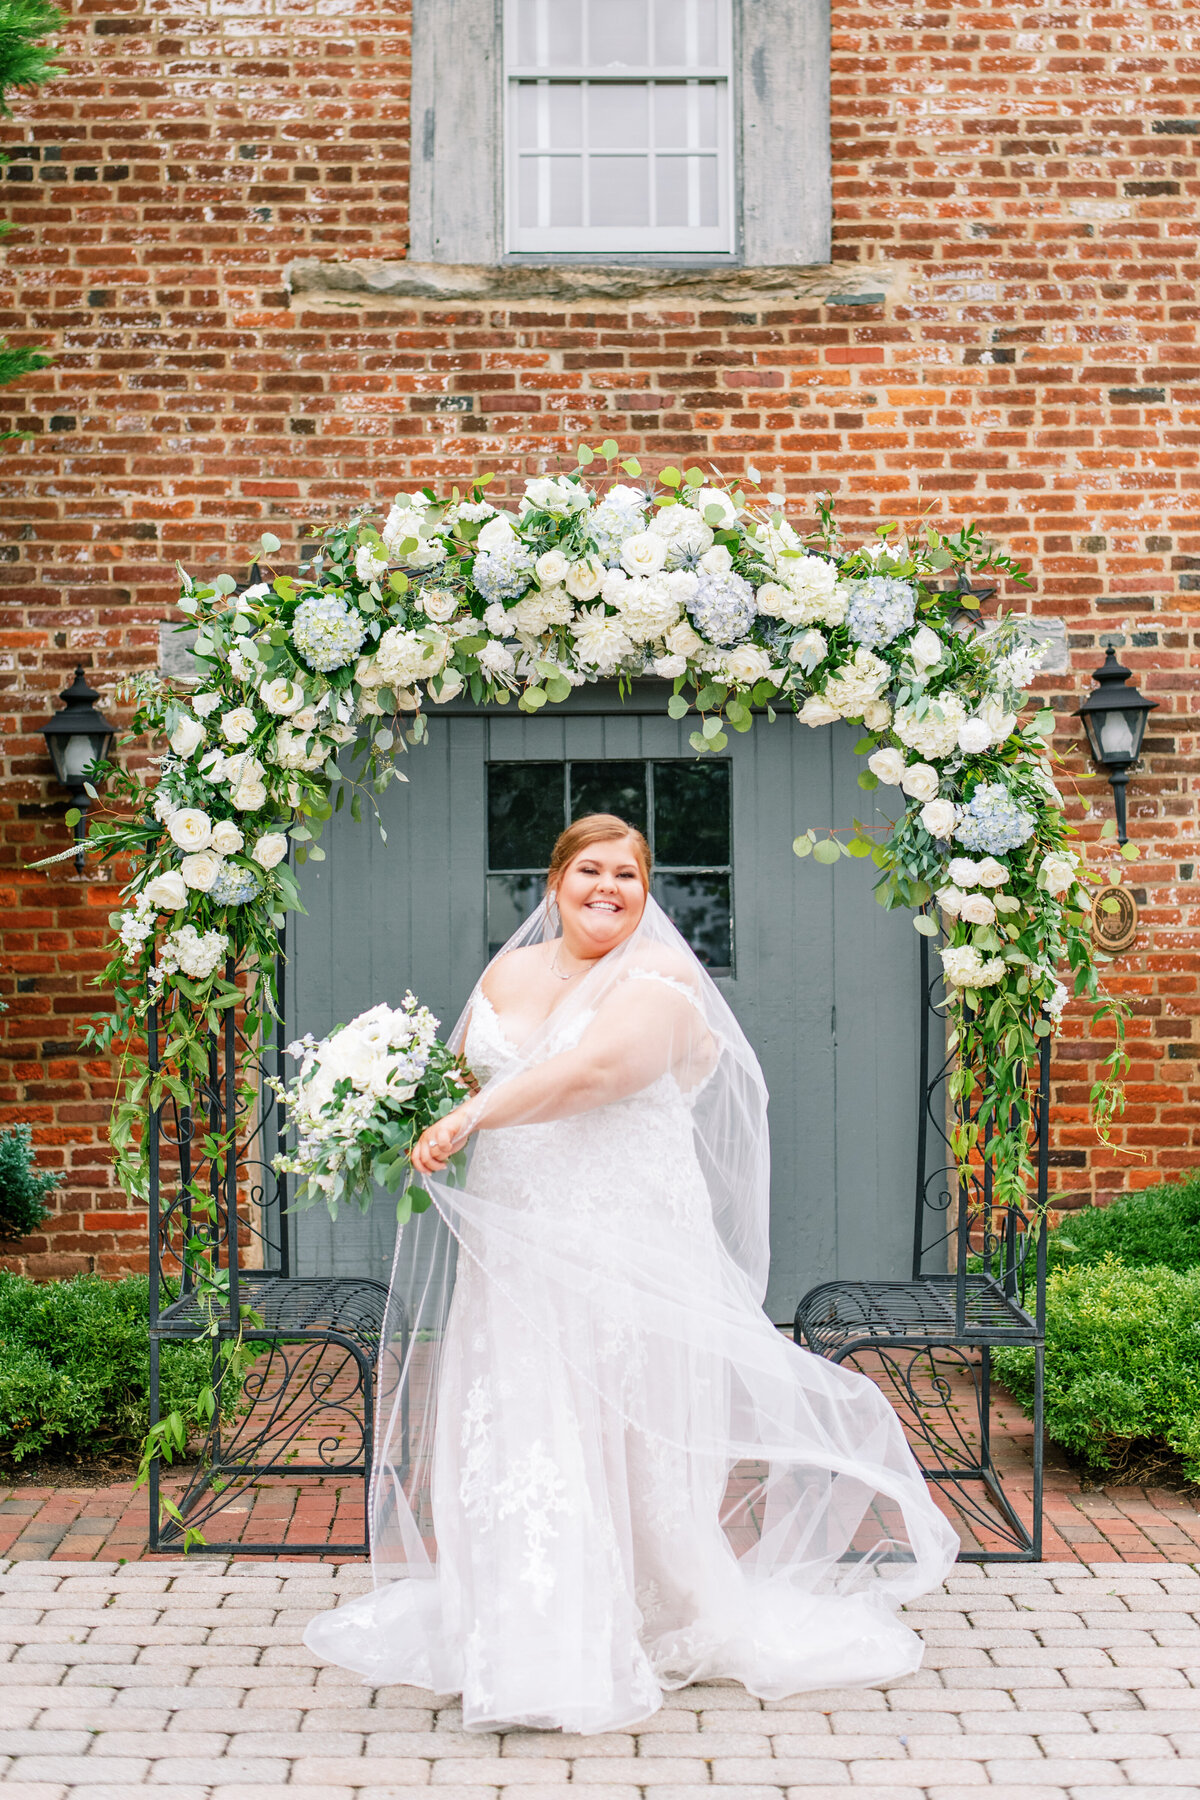 Bride in front of large blue and white arch at wedding venue in Leesburg, VA